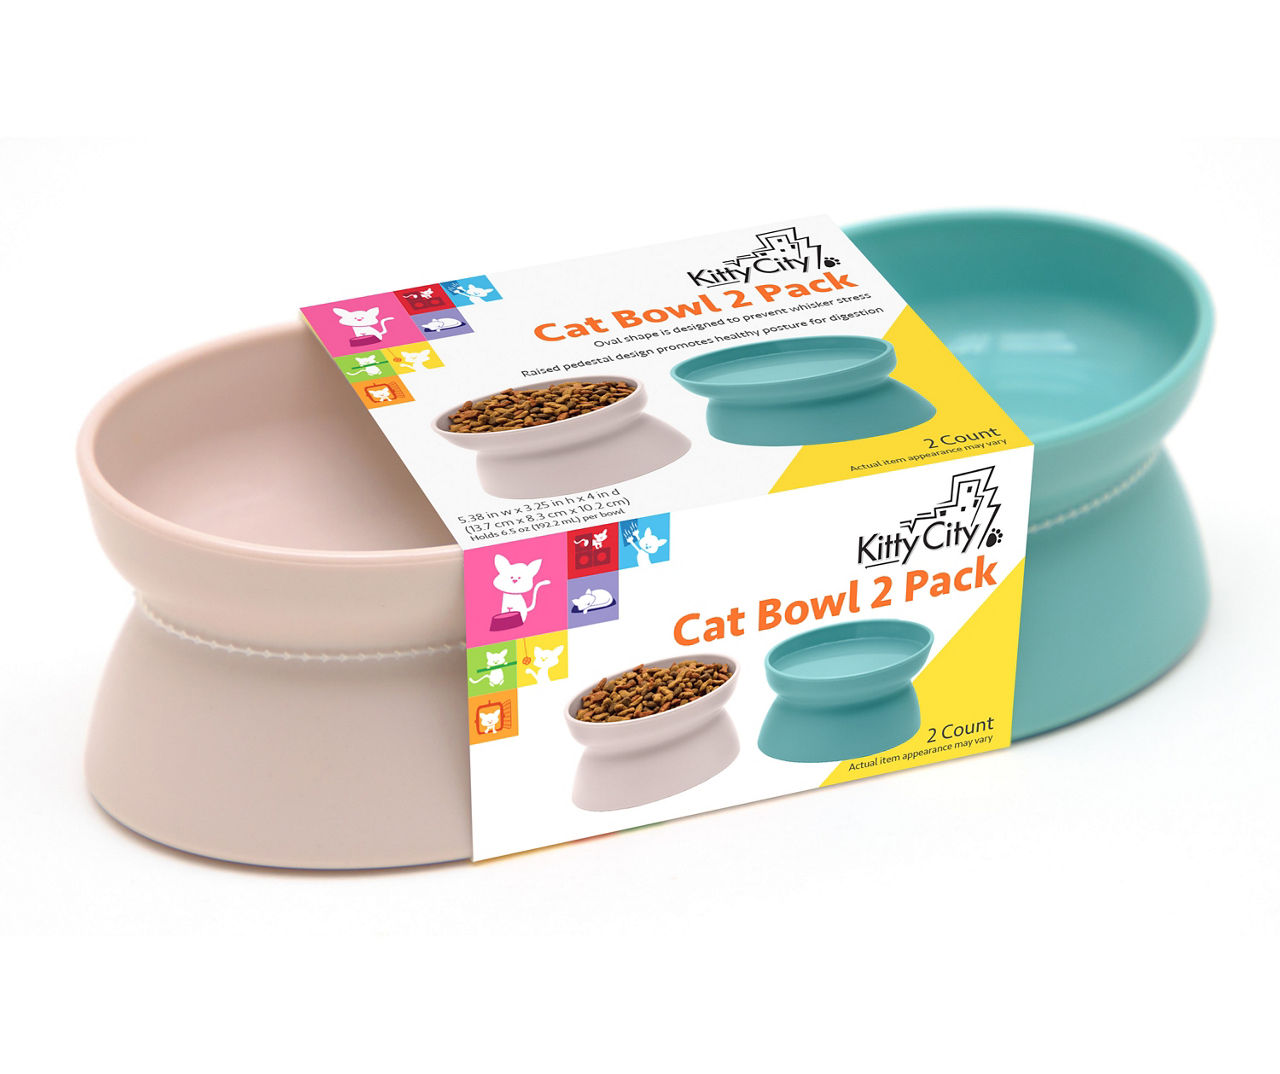 Kitty City Raised Bowls for Cats, Pack of 2